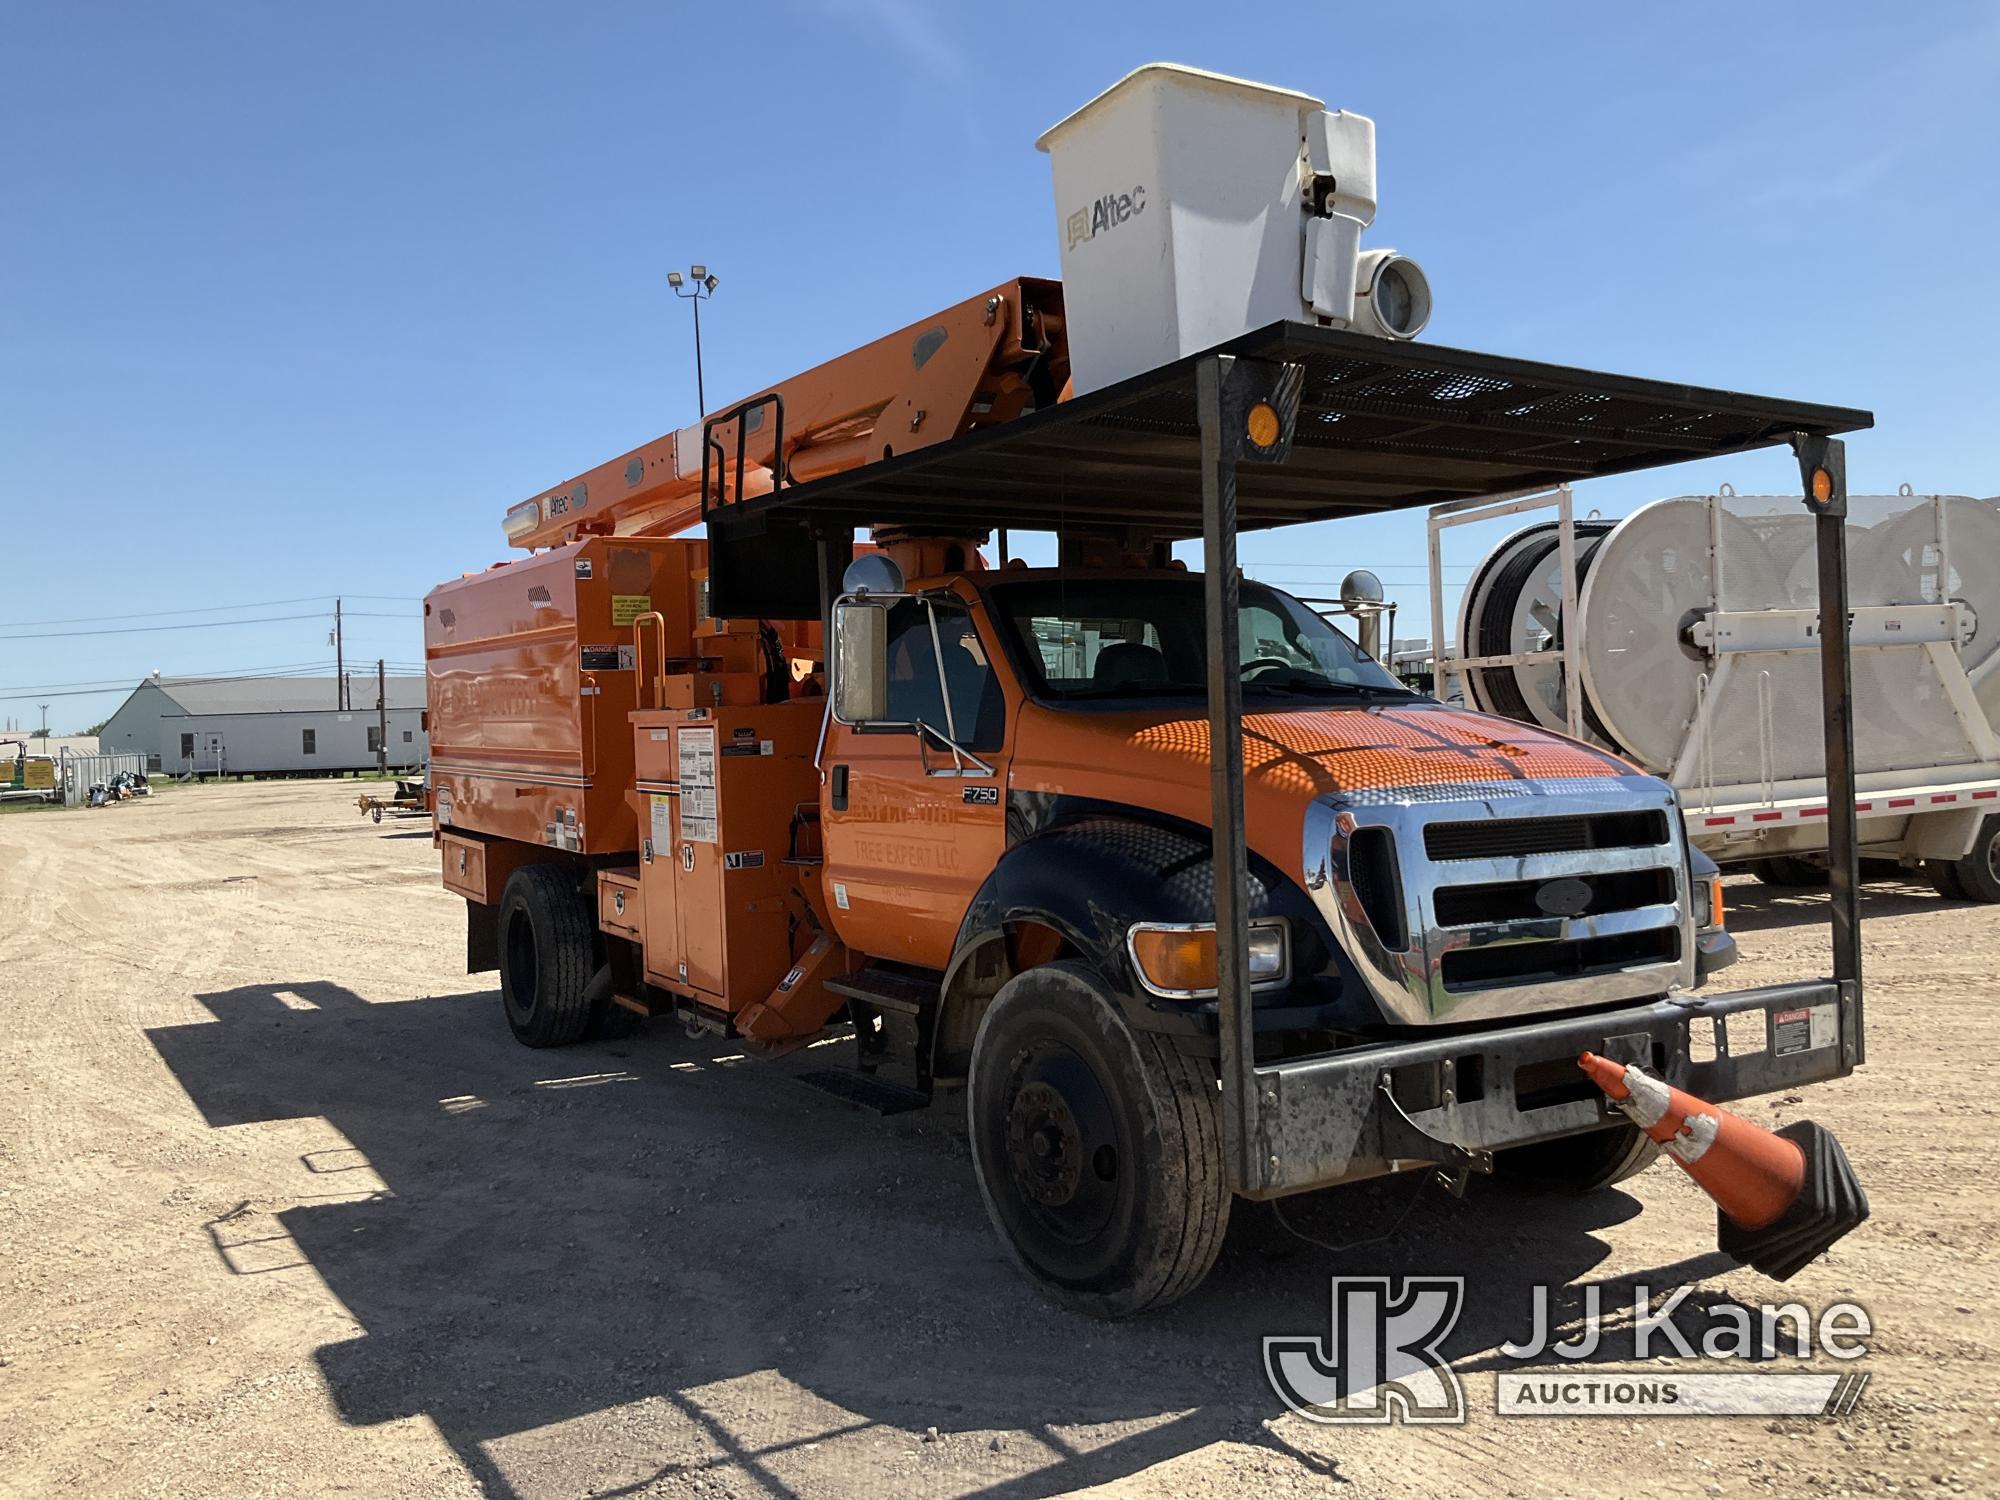 (Waxahachie, TX) Altec LR760E70, Over-Center Elevator Bucket mounted behind cab on 2013 Ford F750 Ch